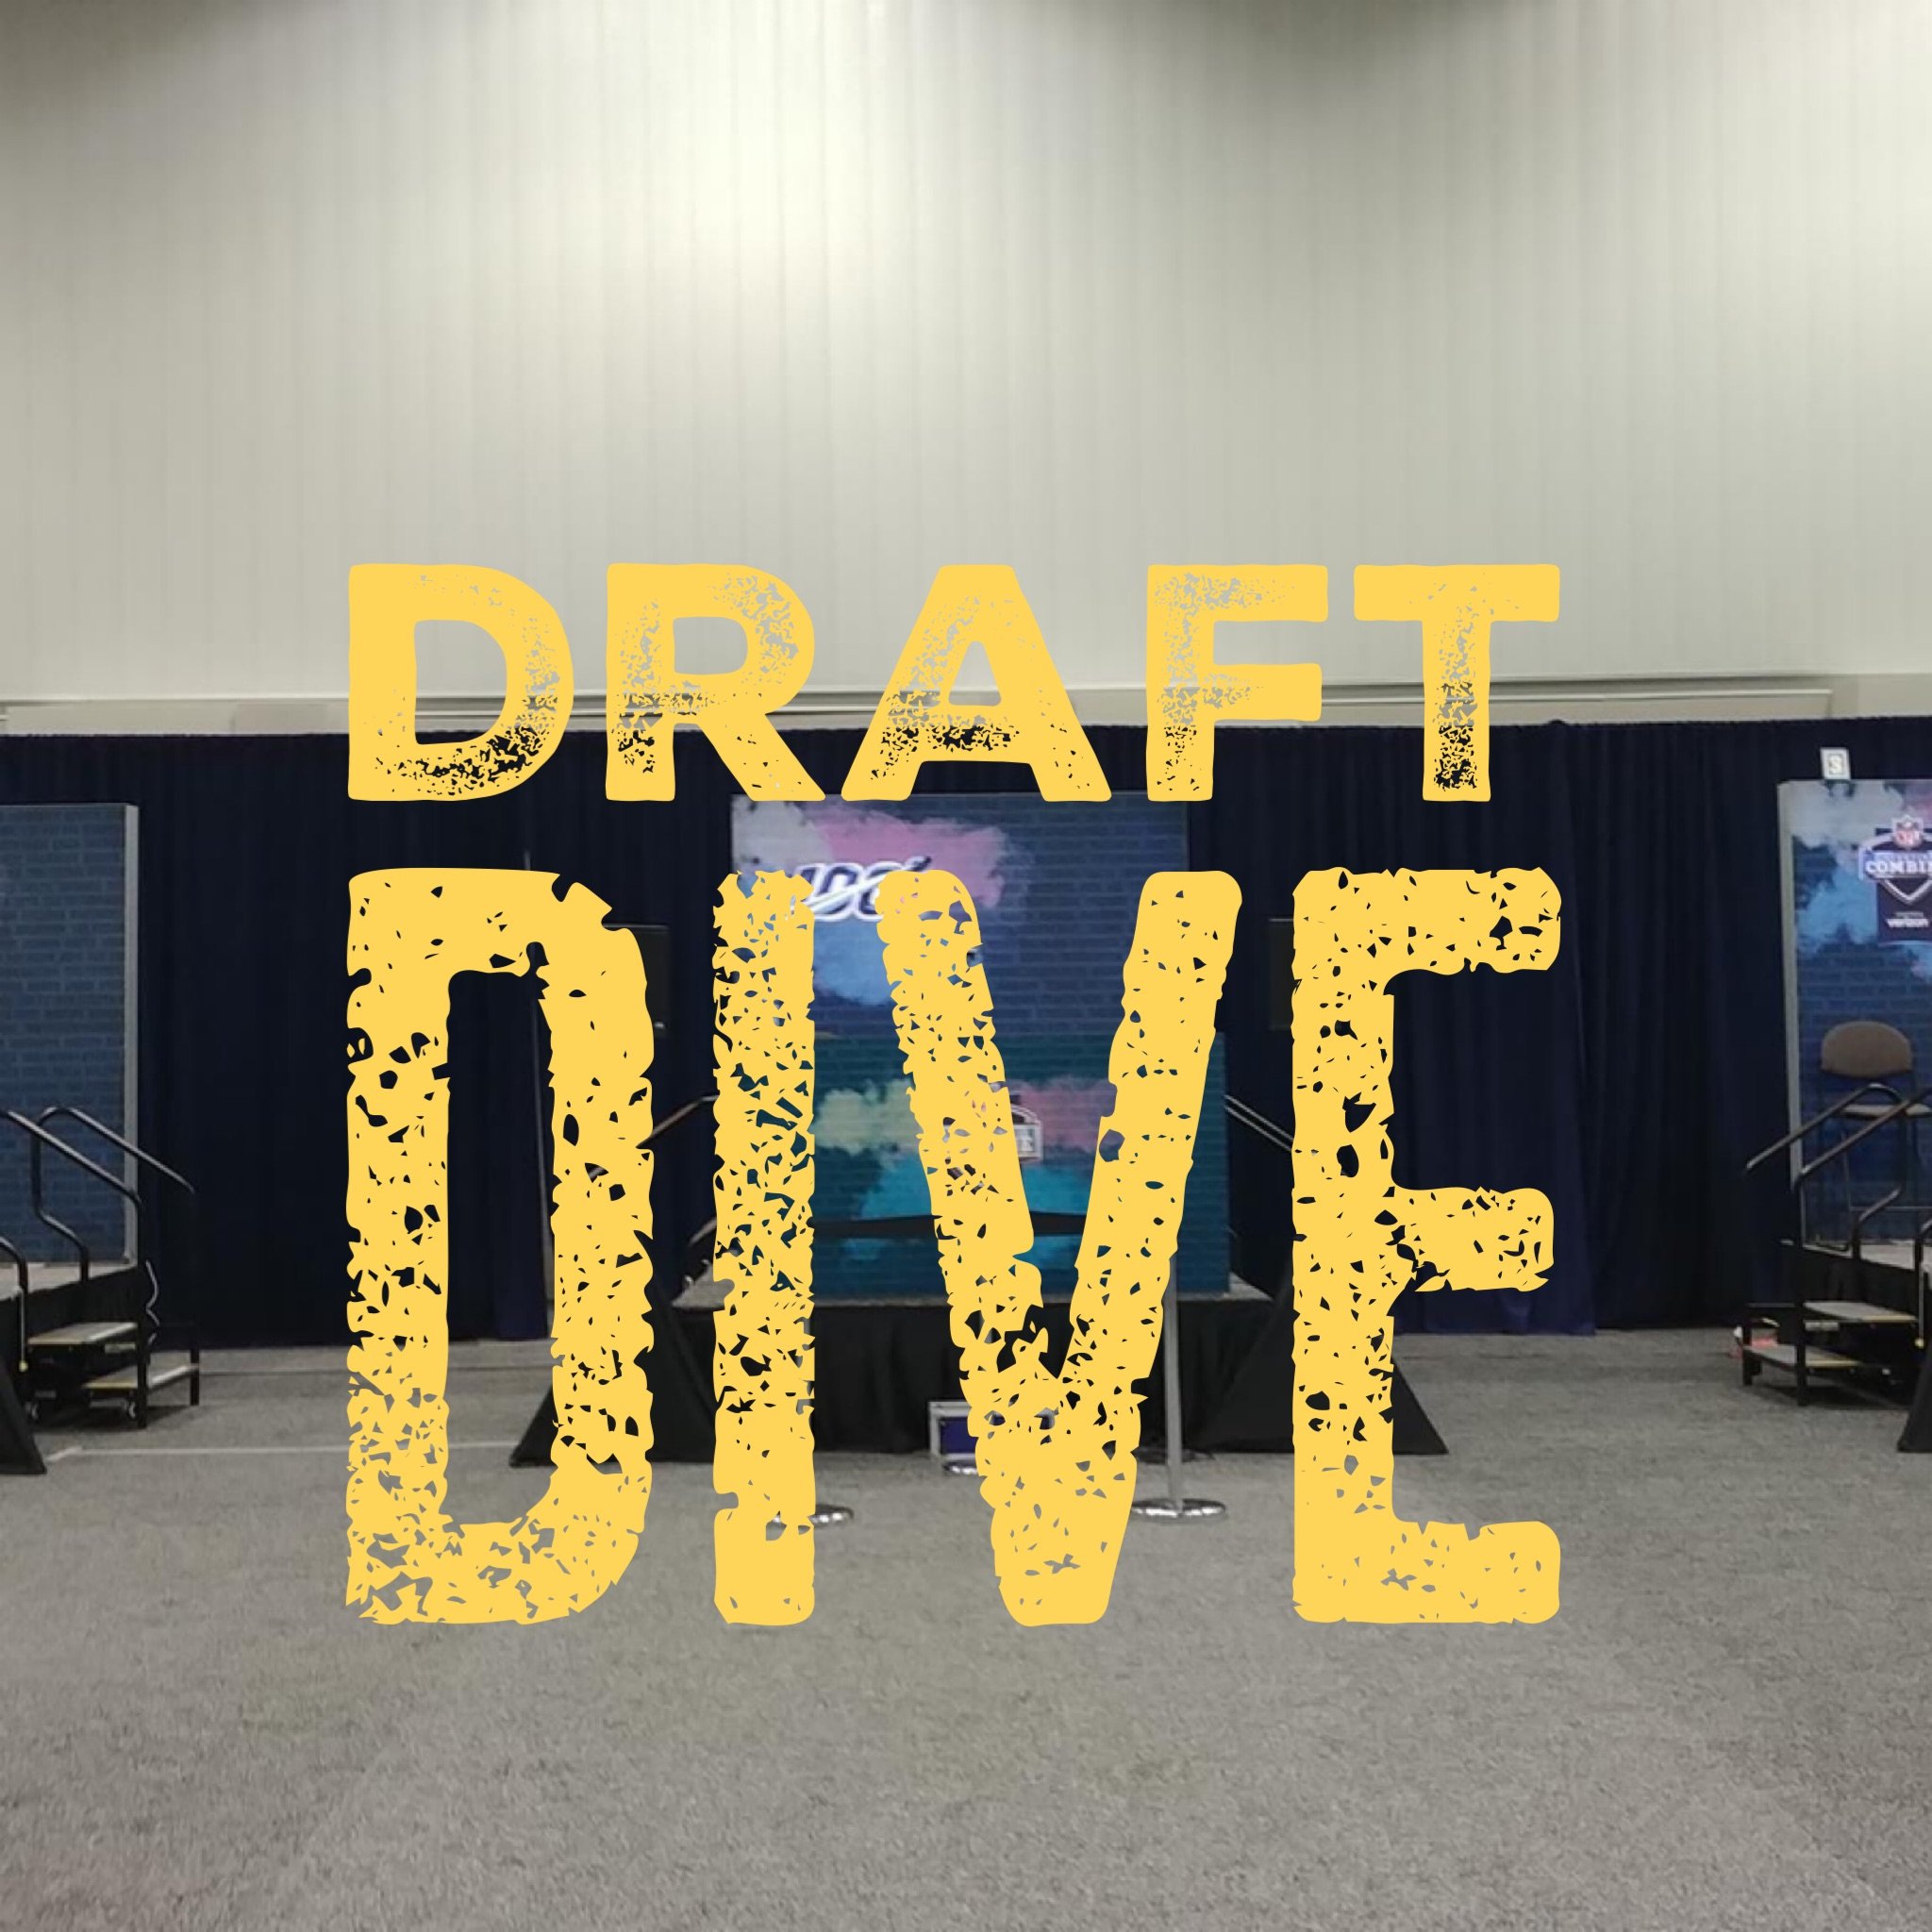 Take a deep dive into the draft. NFL credentialed press for the Combine. Angered John Dorsey with a softball question. YouTube:https://t.co/UJscyemaPJ